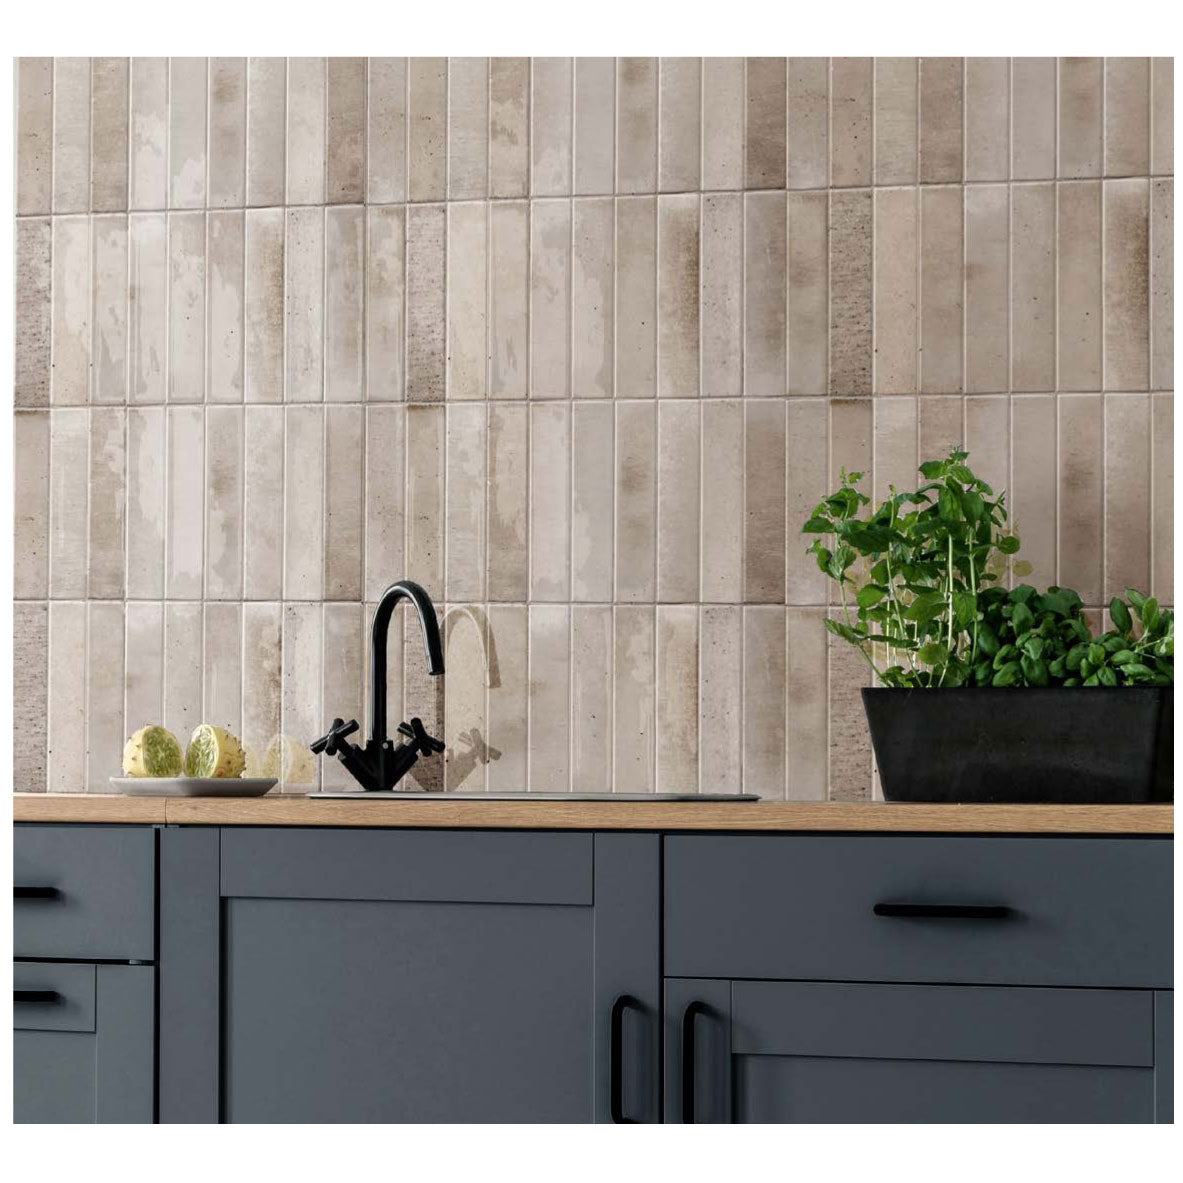 Cobsa - Homey Series 3 in. x 10 in. Porcelain Subway Tile - Honey installed